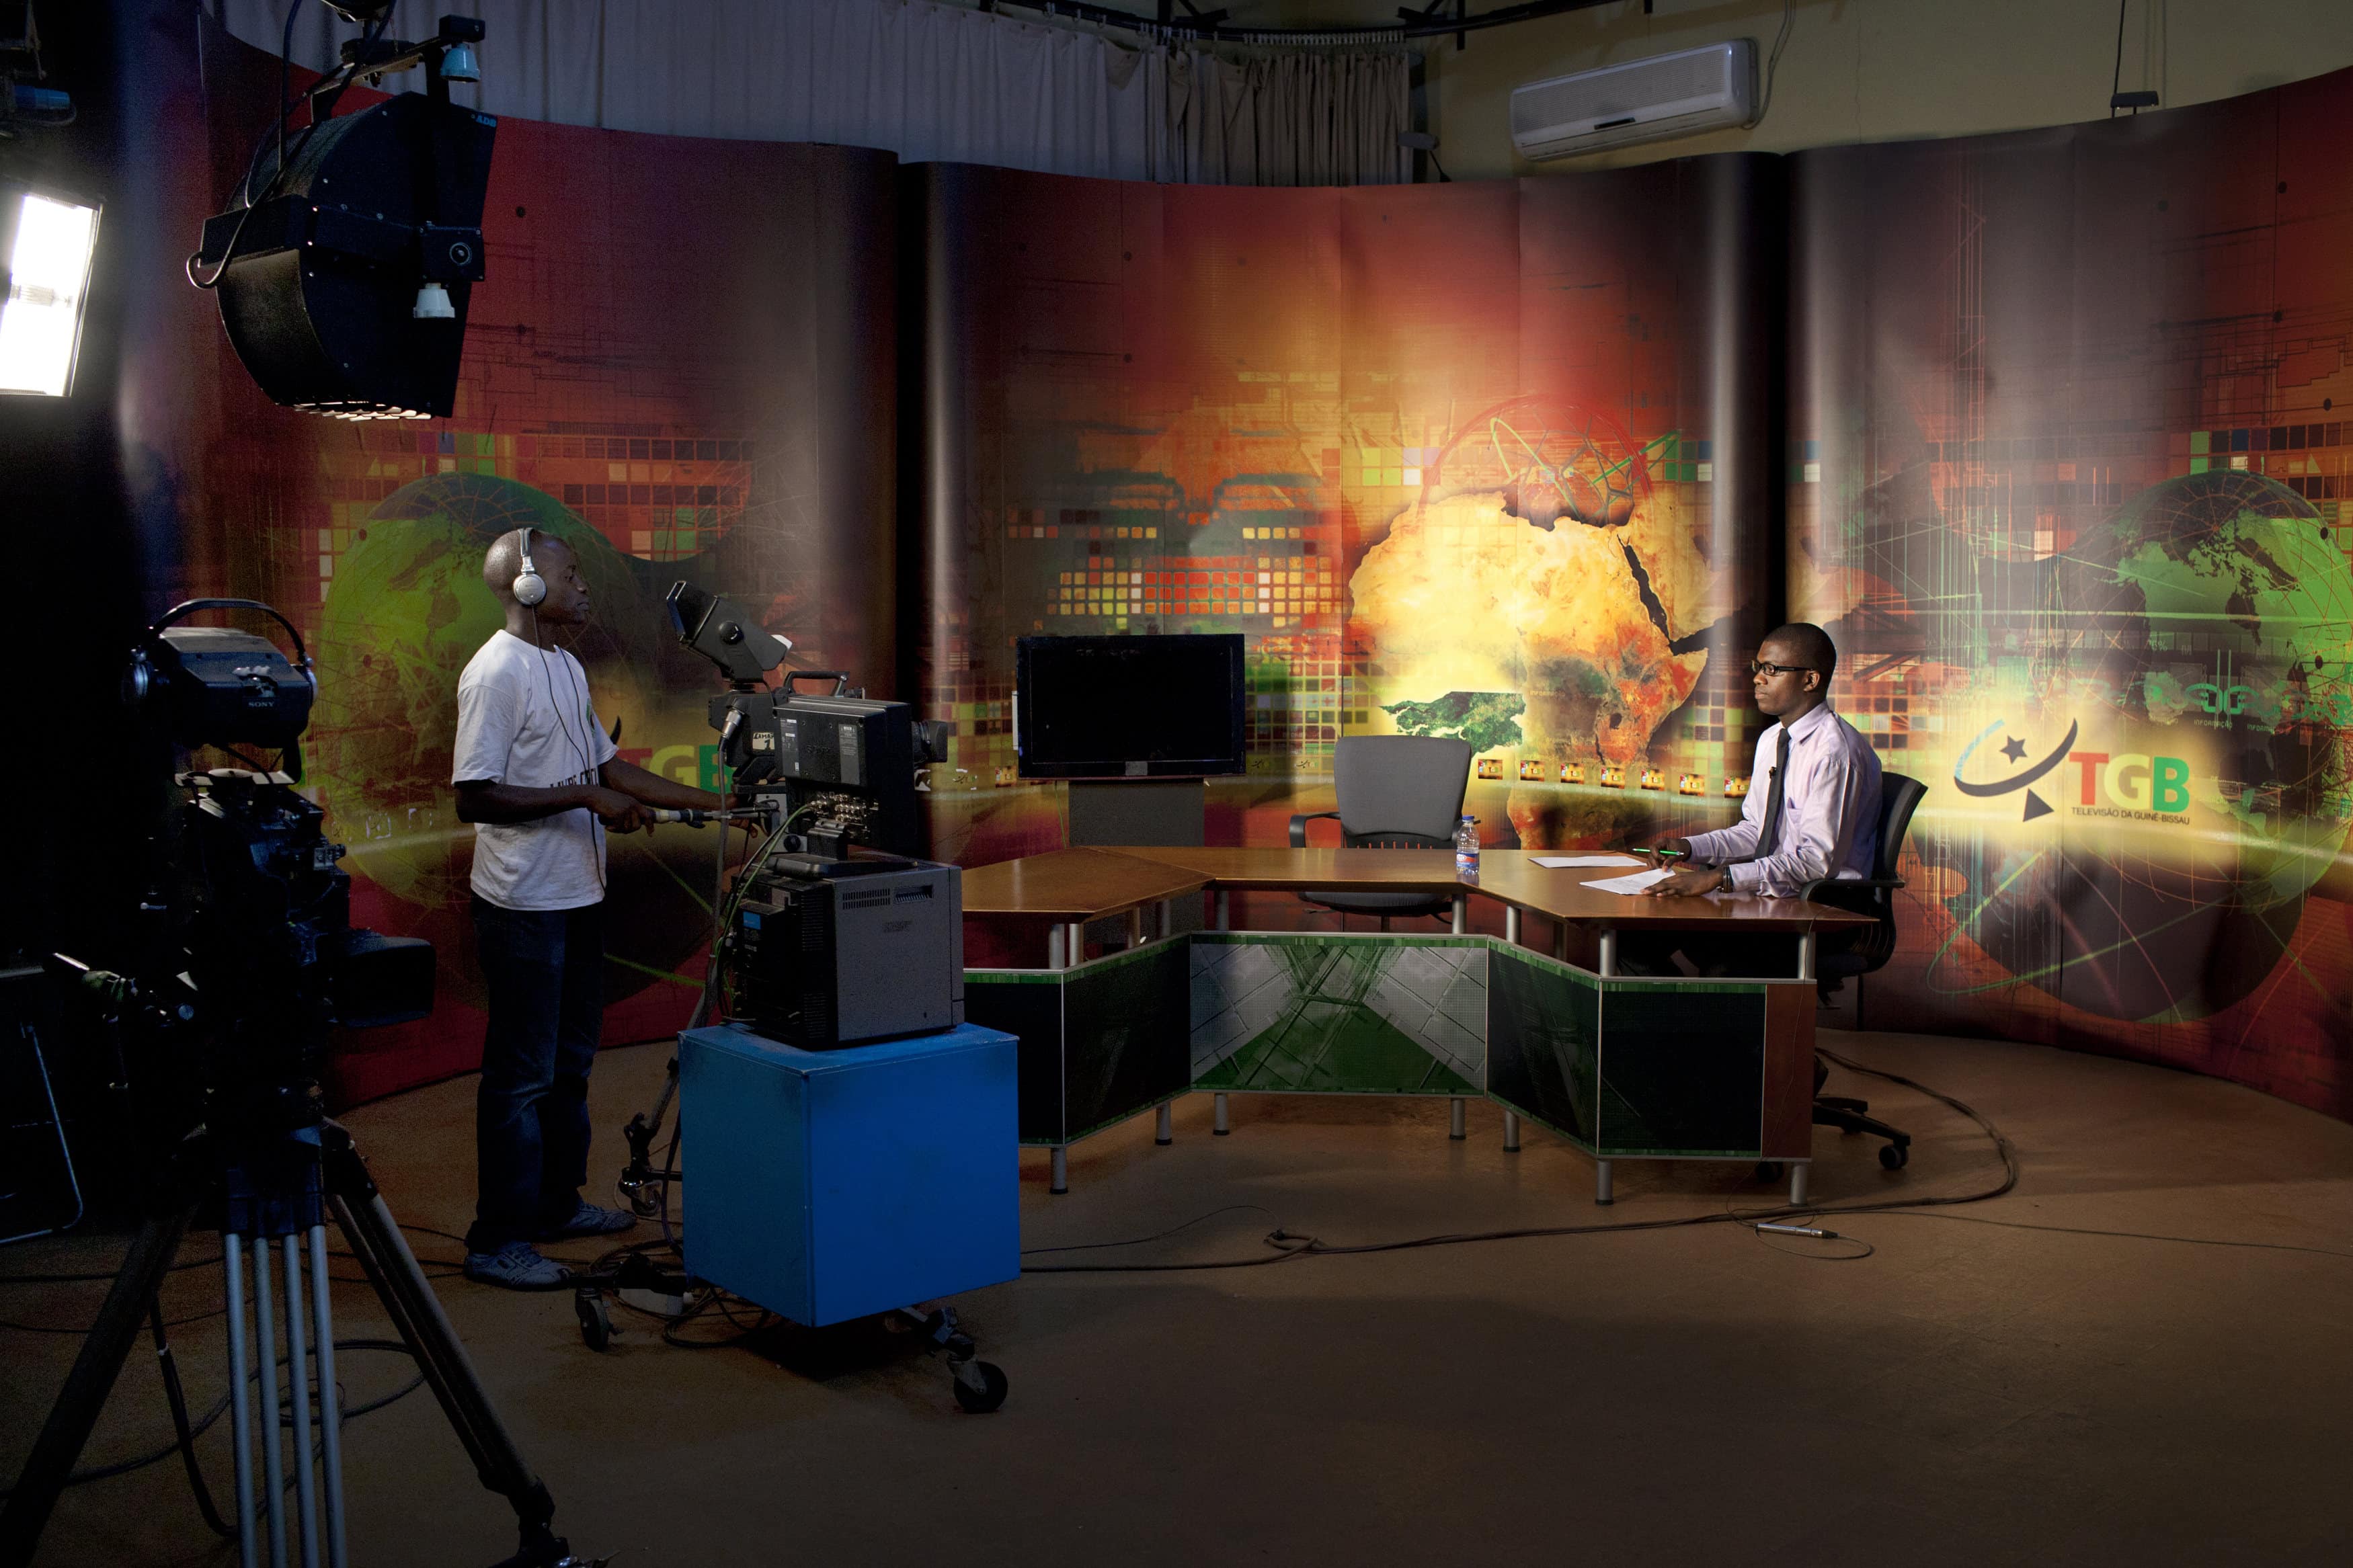 A newscaster reads the news during a broadcast of Guinea-Bissau's national television in the capital, Bissau, 29 October 2012, REUTERS/Joe Penney